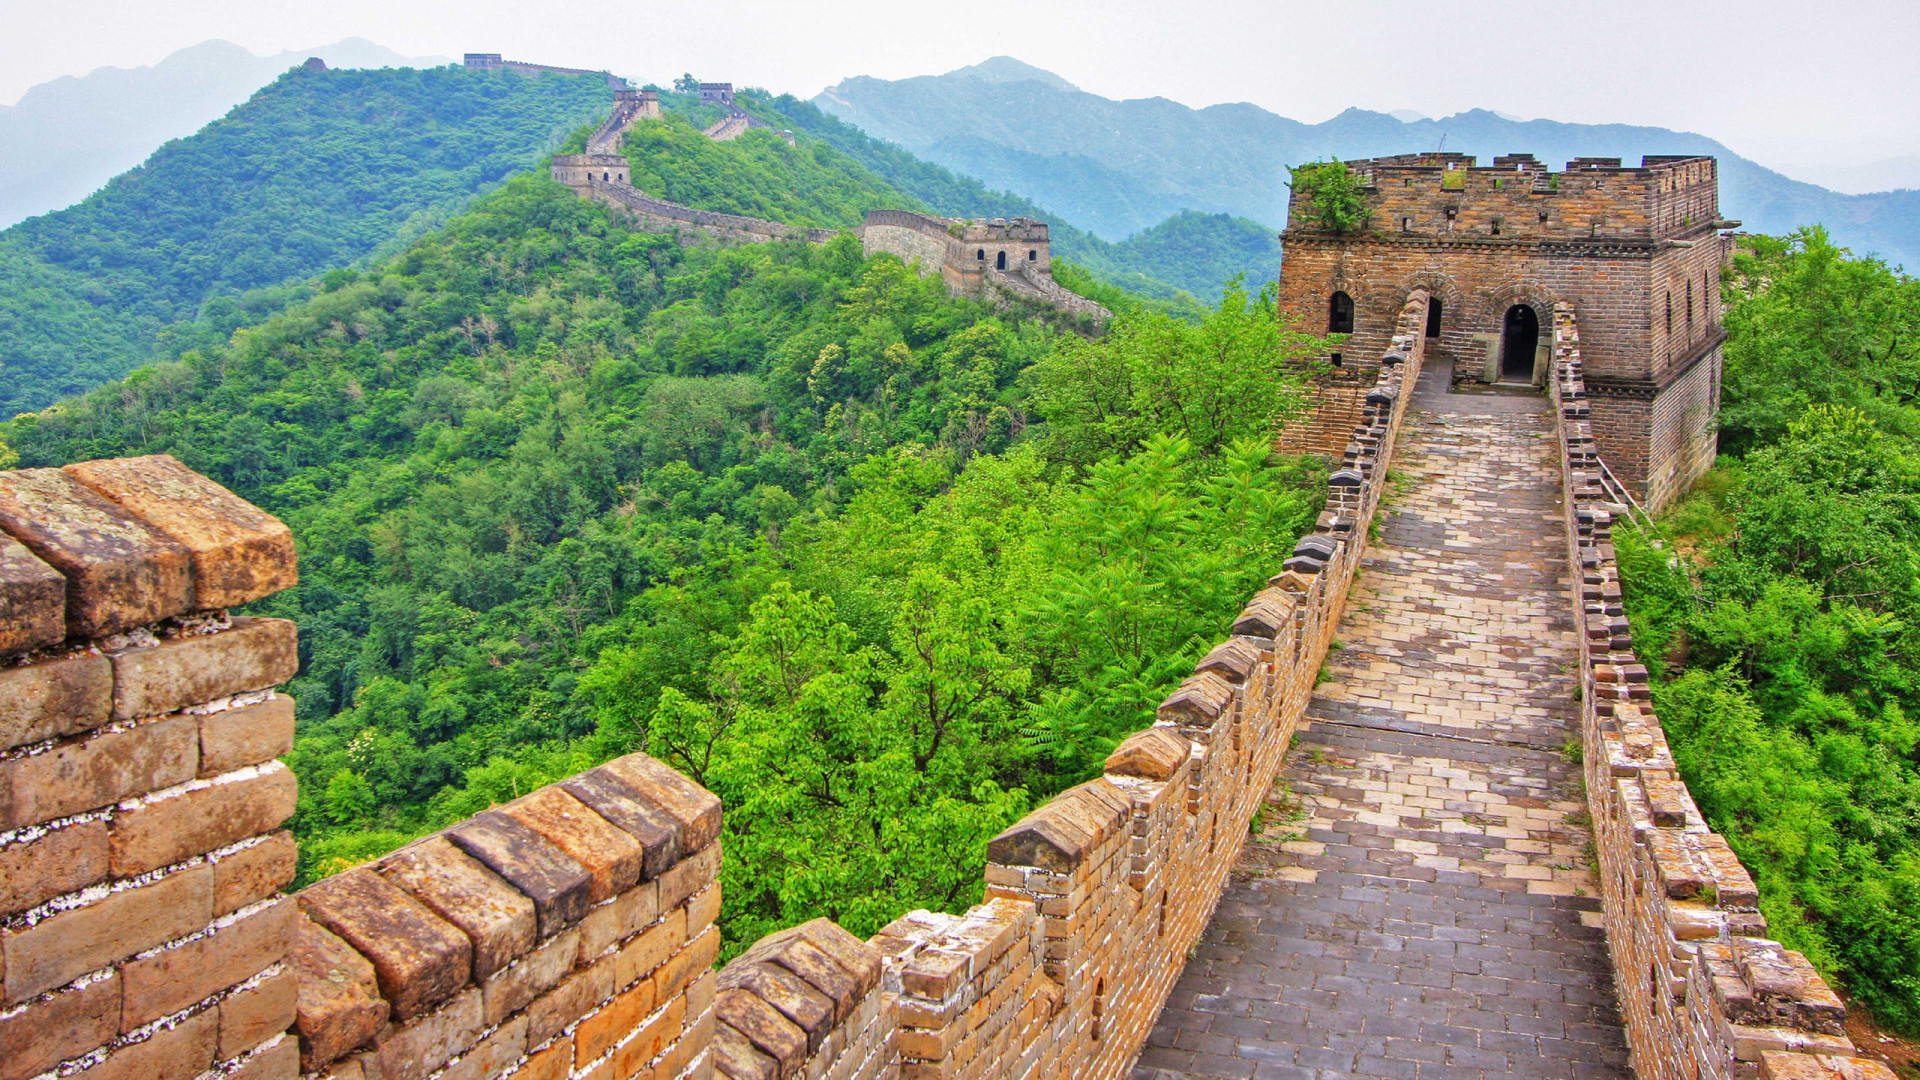 Great Wall Of China Image Check Out